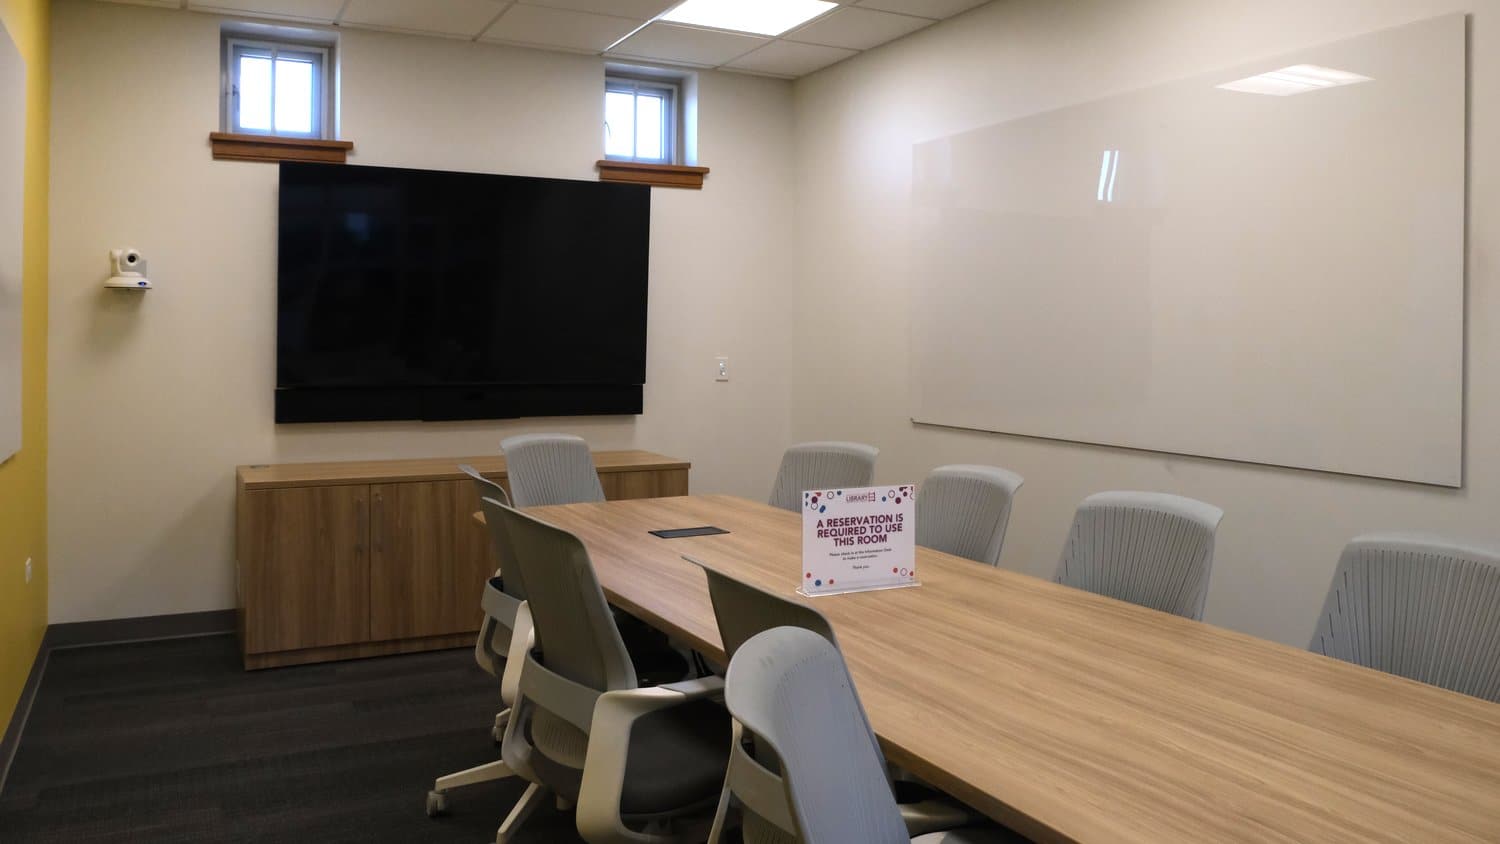 Collaboration Room at the Huntley Library.